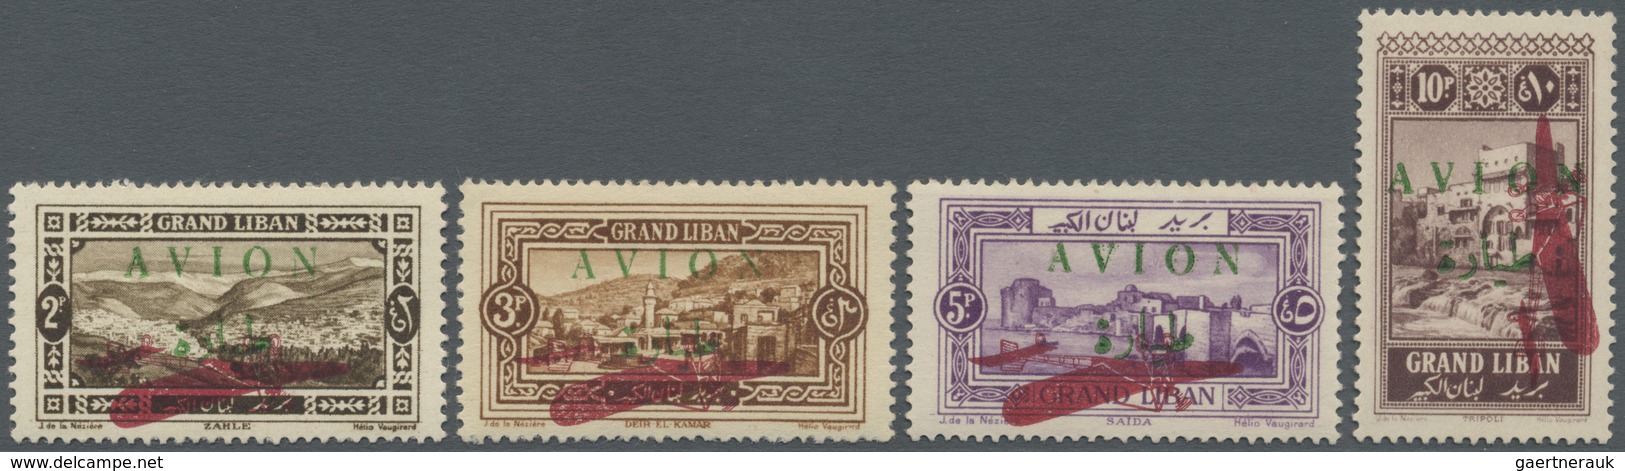 * Libanon: 1925, Airmails, INVERTED Carmine "Plane" Surcharge On Green "AVION" Overprints, Not Isused, - Lebanon